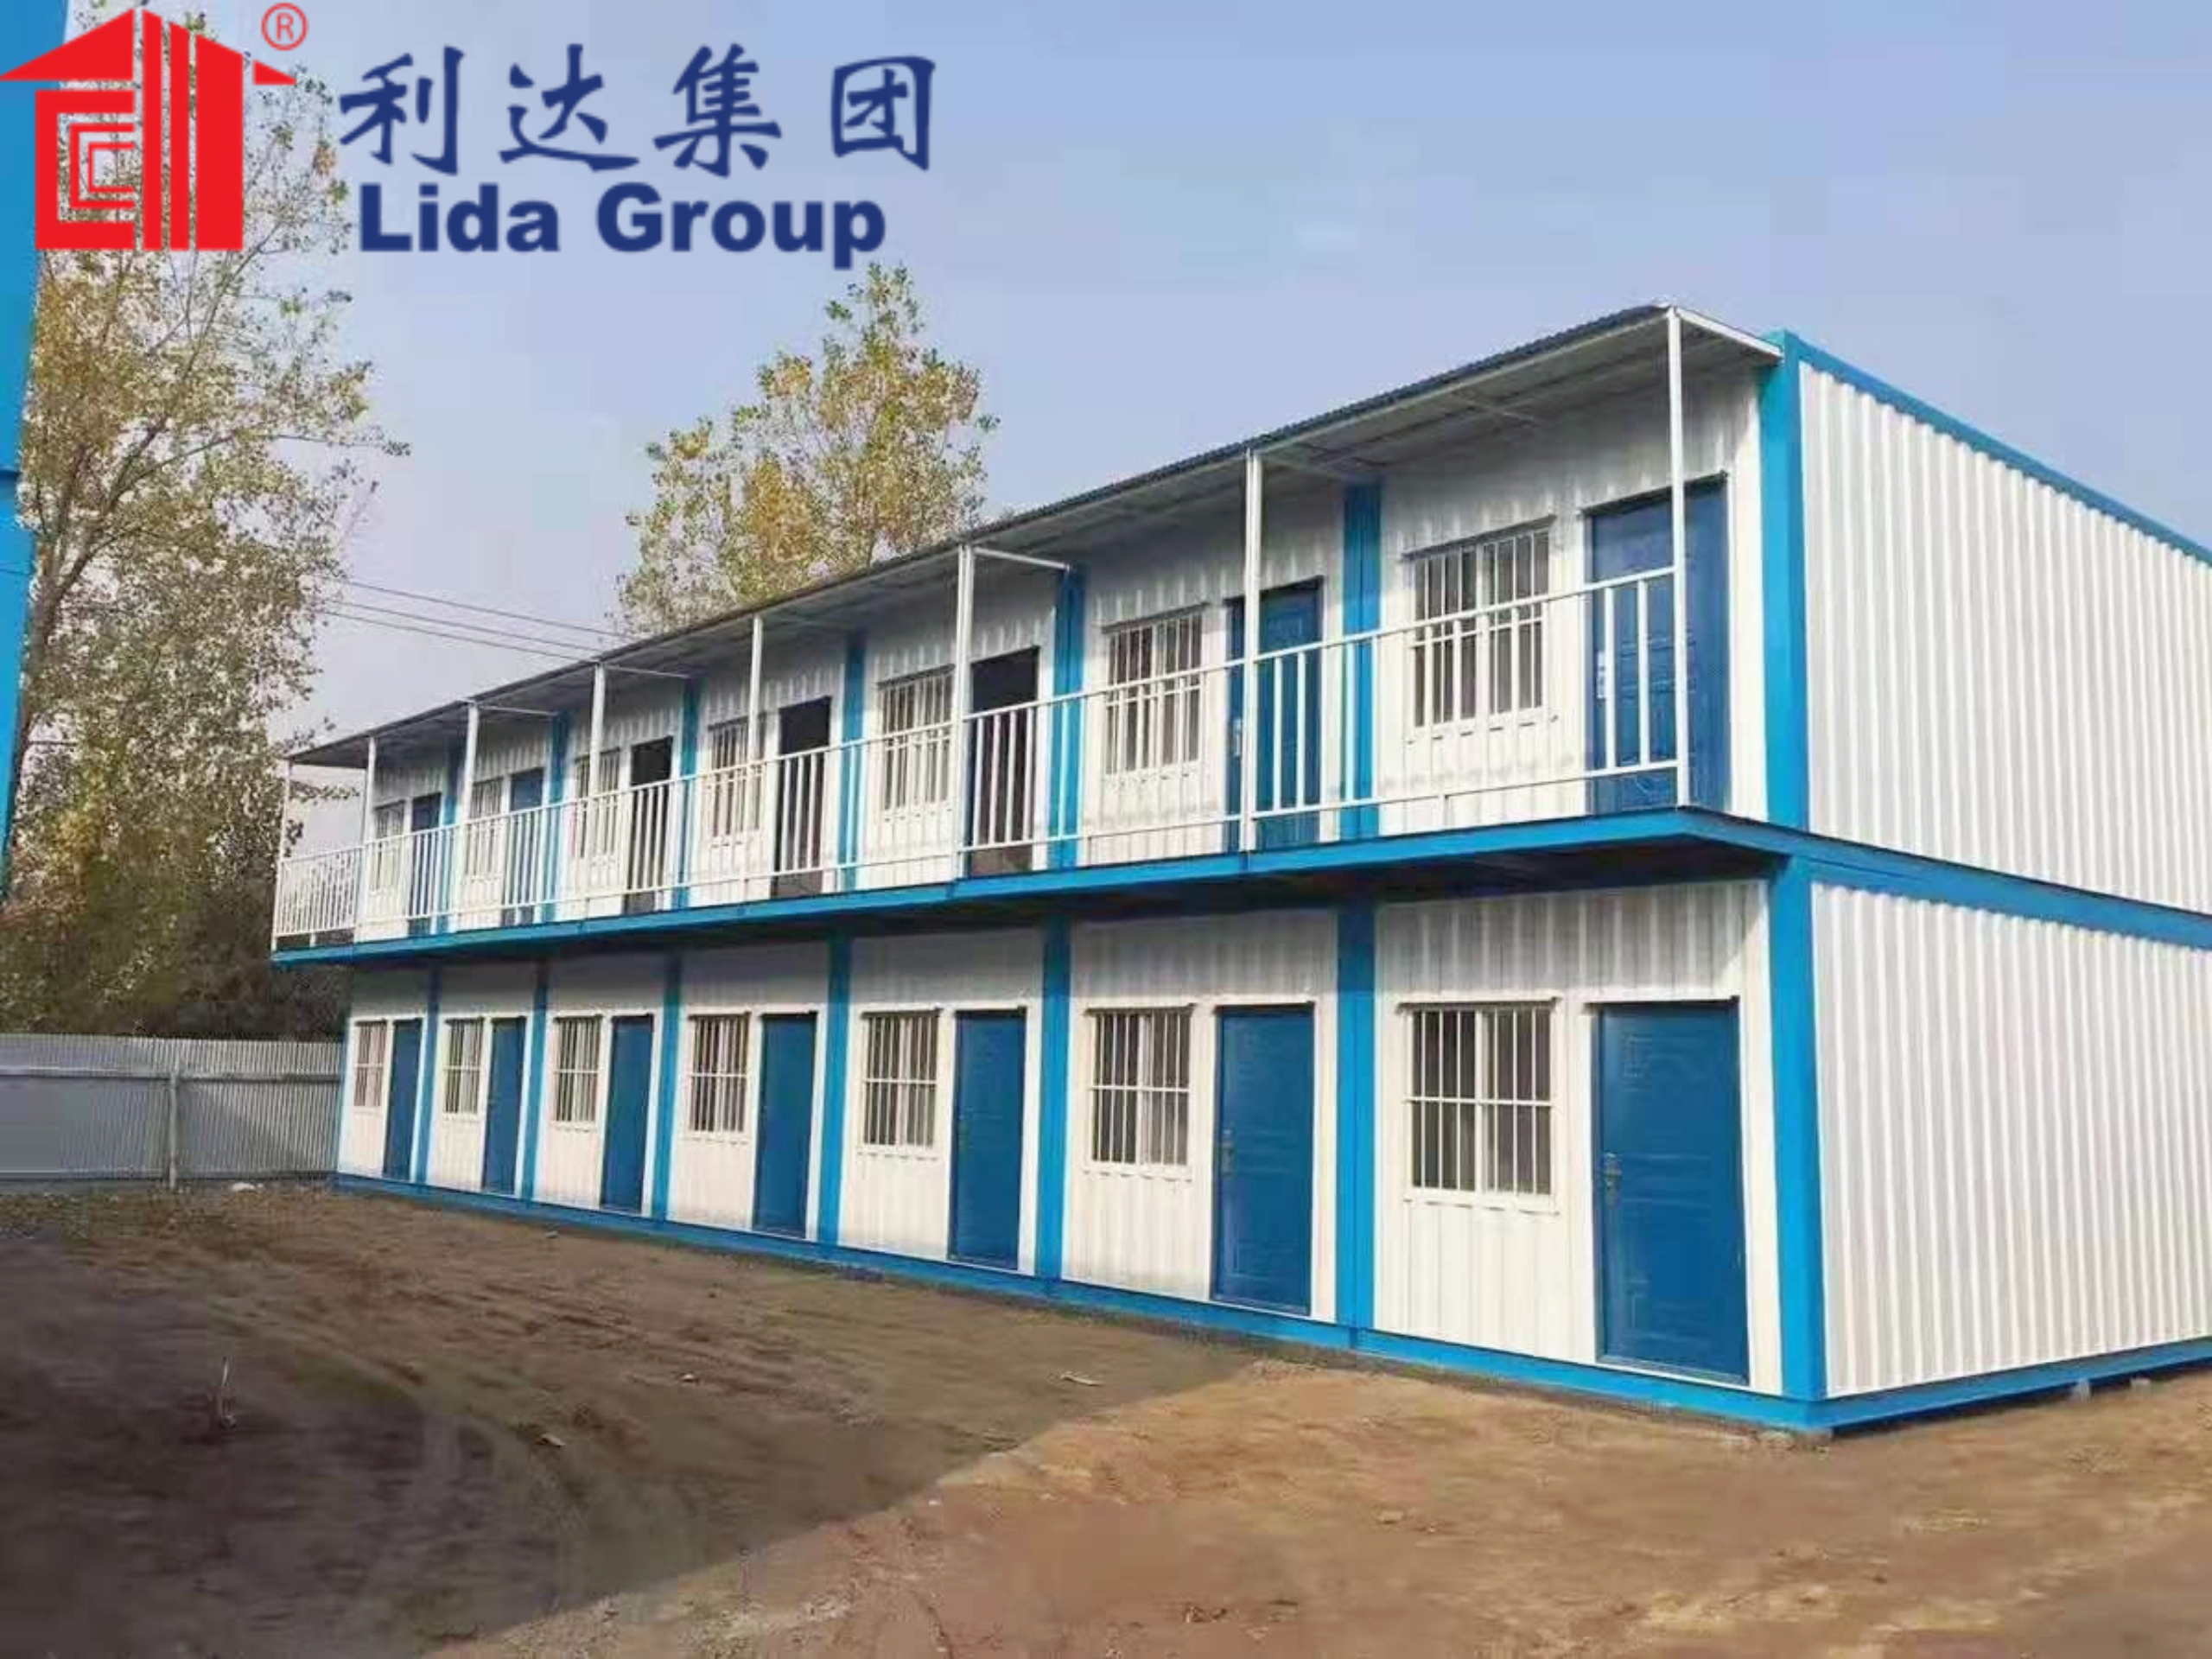 Engineers Analyze Steel Container Home Blueprints Proposed by Lida Group to Withstand Seismic Activity and High Winds Required for Development in Remote Regions